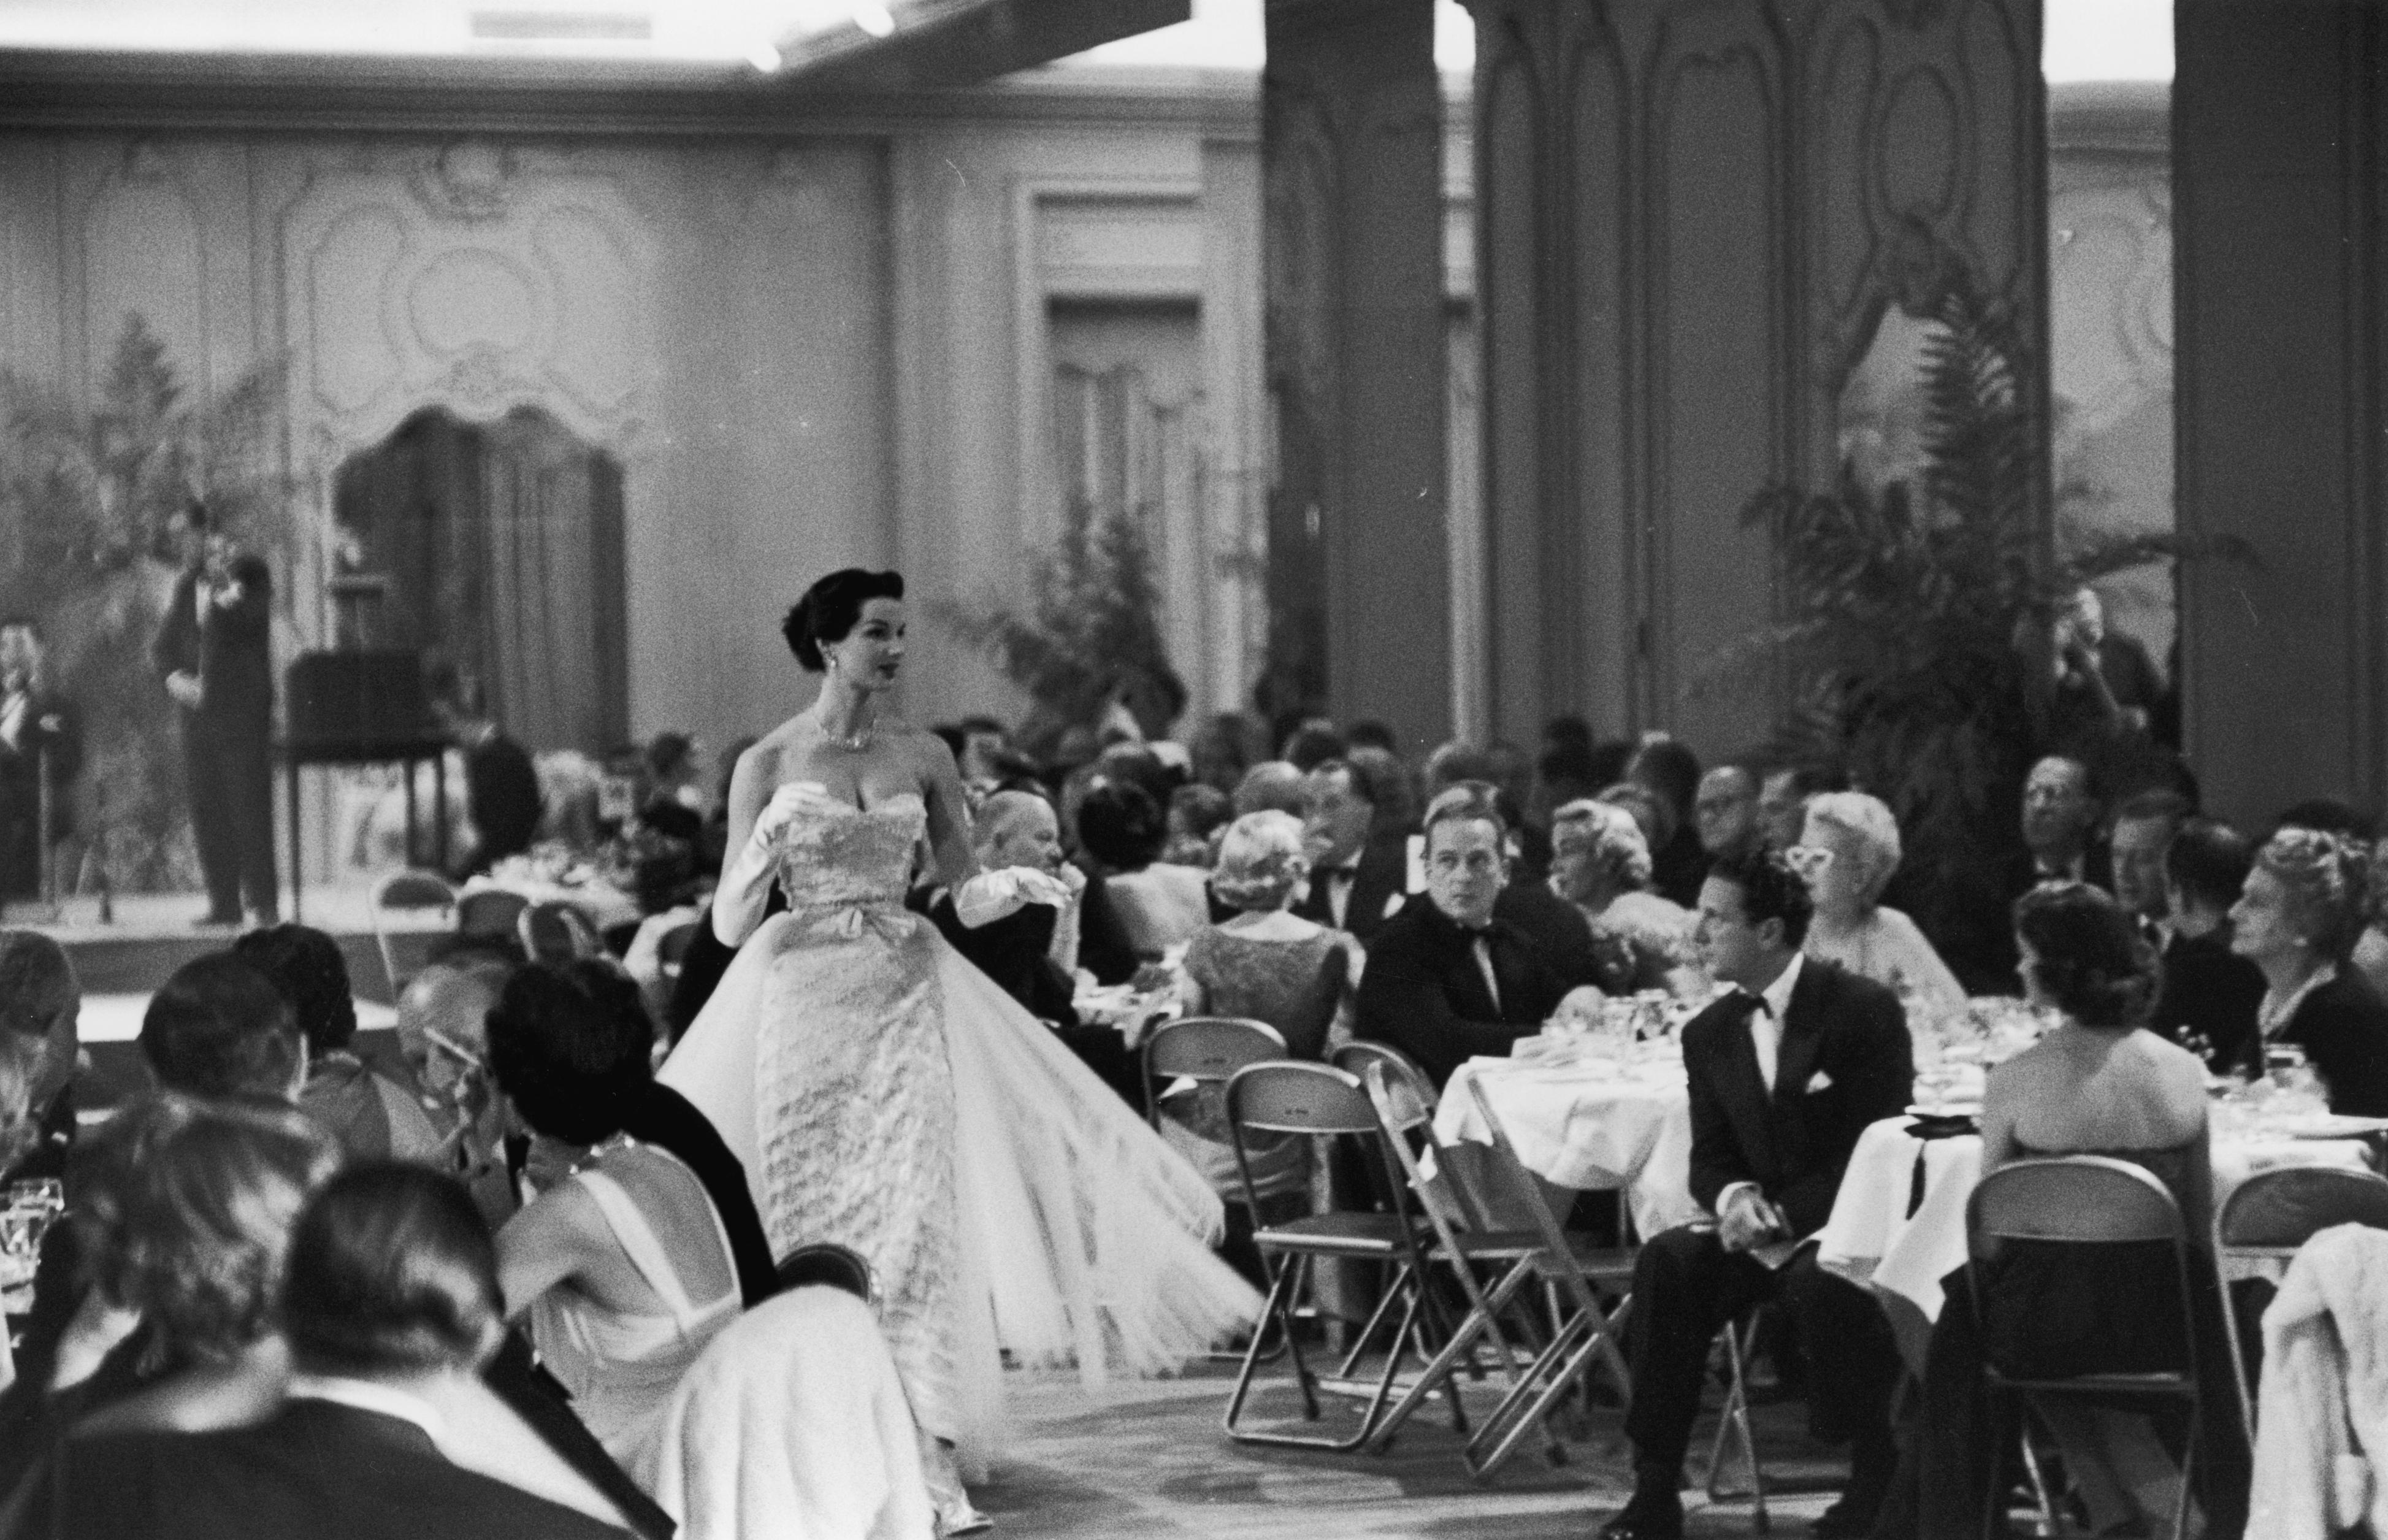 Saks Fashion Show by Slim Aarons